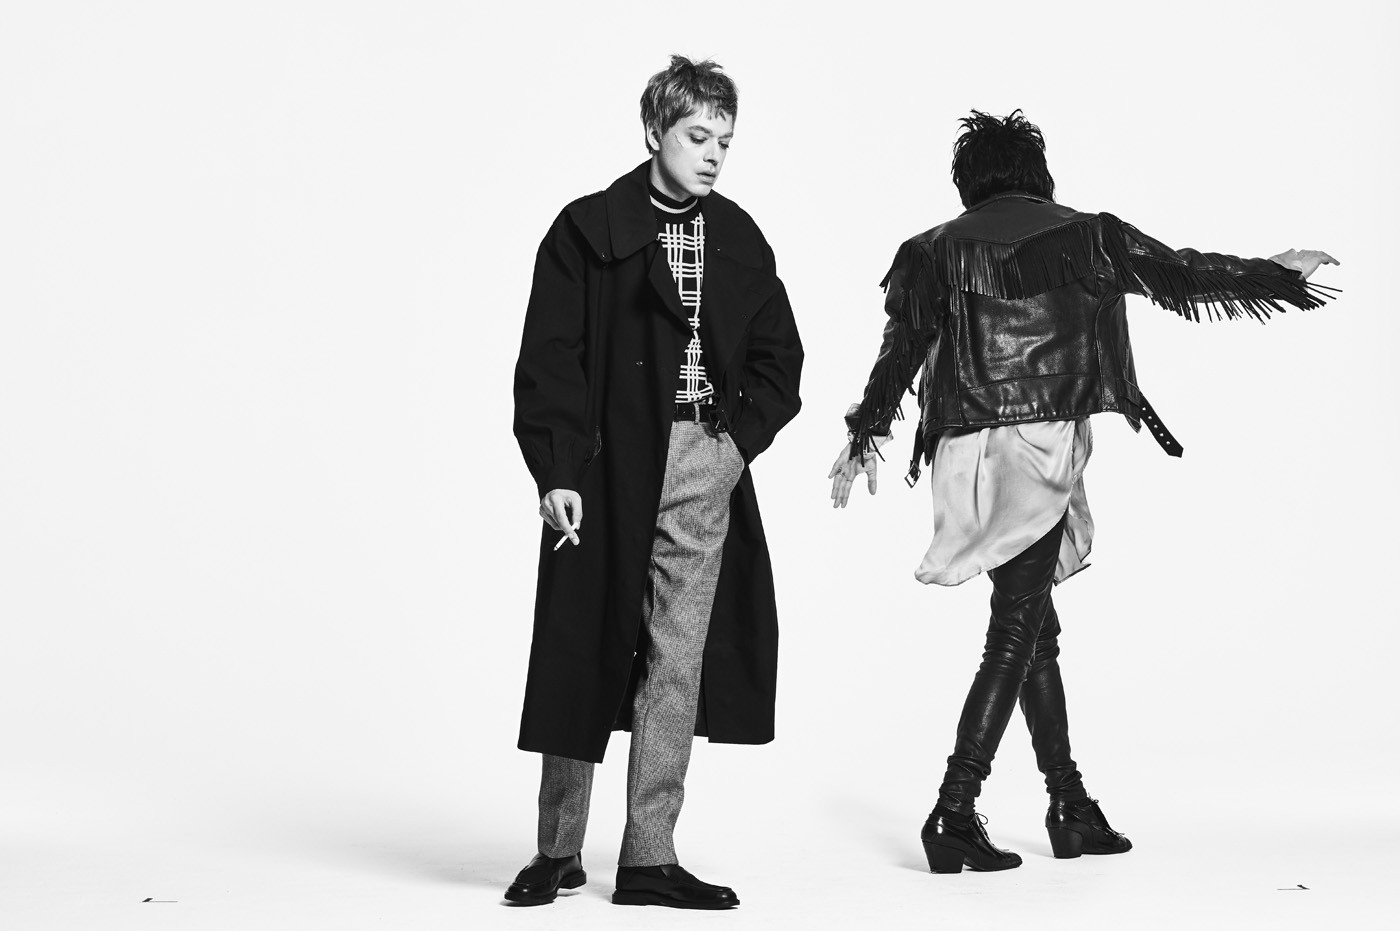 From left, Hooky wears vintage coat from Early Halloween, New York. Sweater, trousers, and shoes by Fendi. Orion wears vintage jacket from What Goes Around Comes Around, New York. Shirt by Ann Demeulemeester. Trousers, vintage Vivienne Westwood boots, and earring, stylist's own.